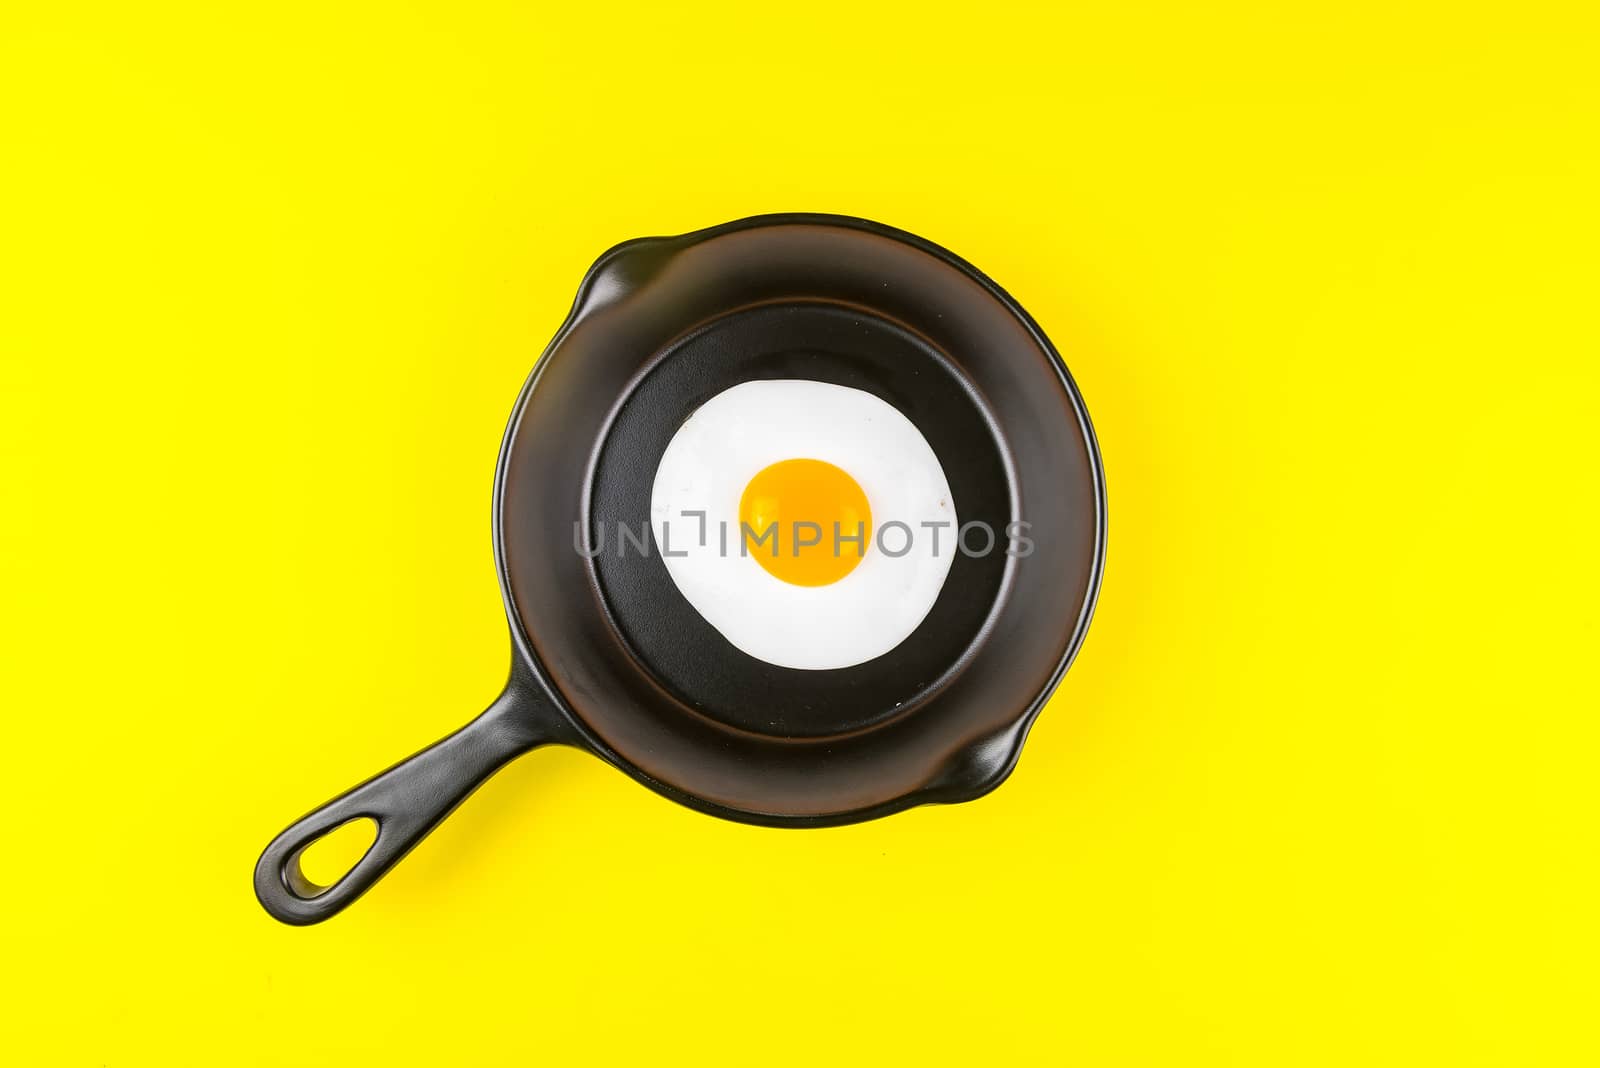 Frying pan with fried egg isolated on a yellow background viewed from above.